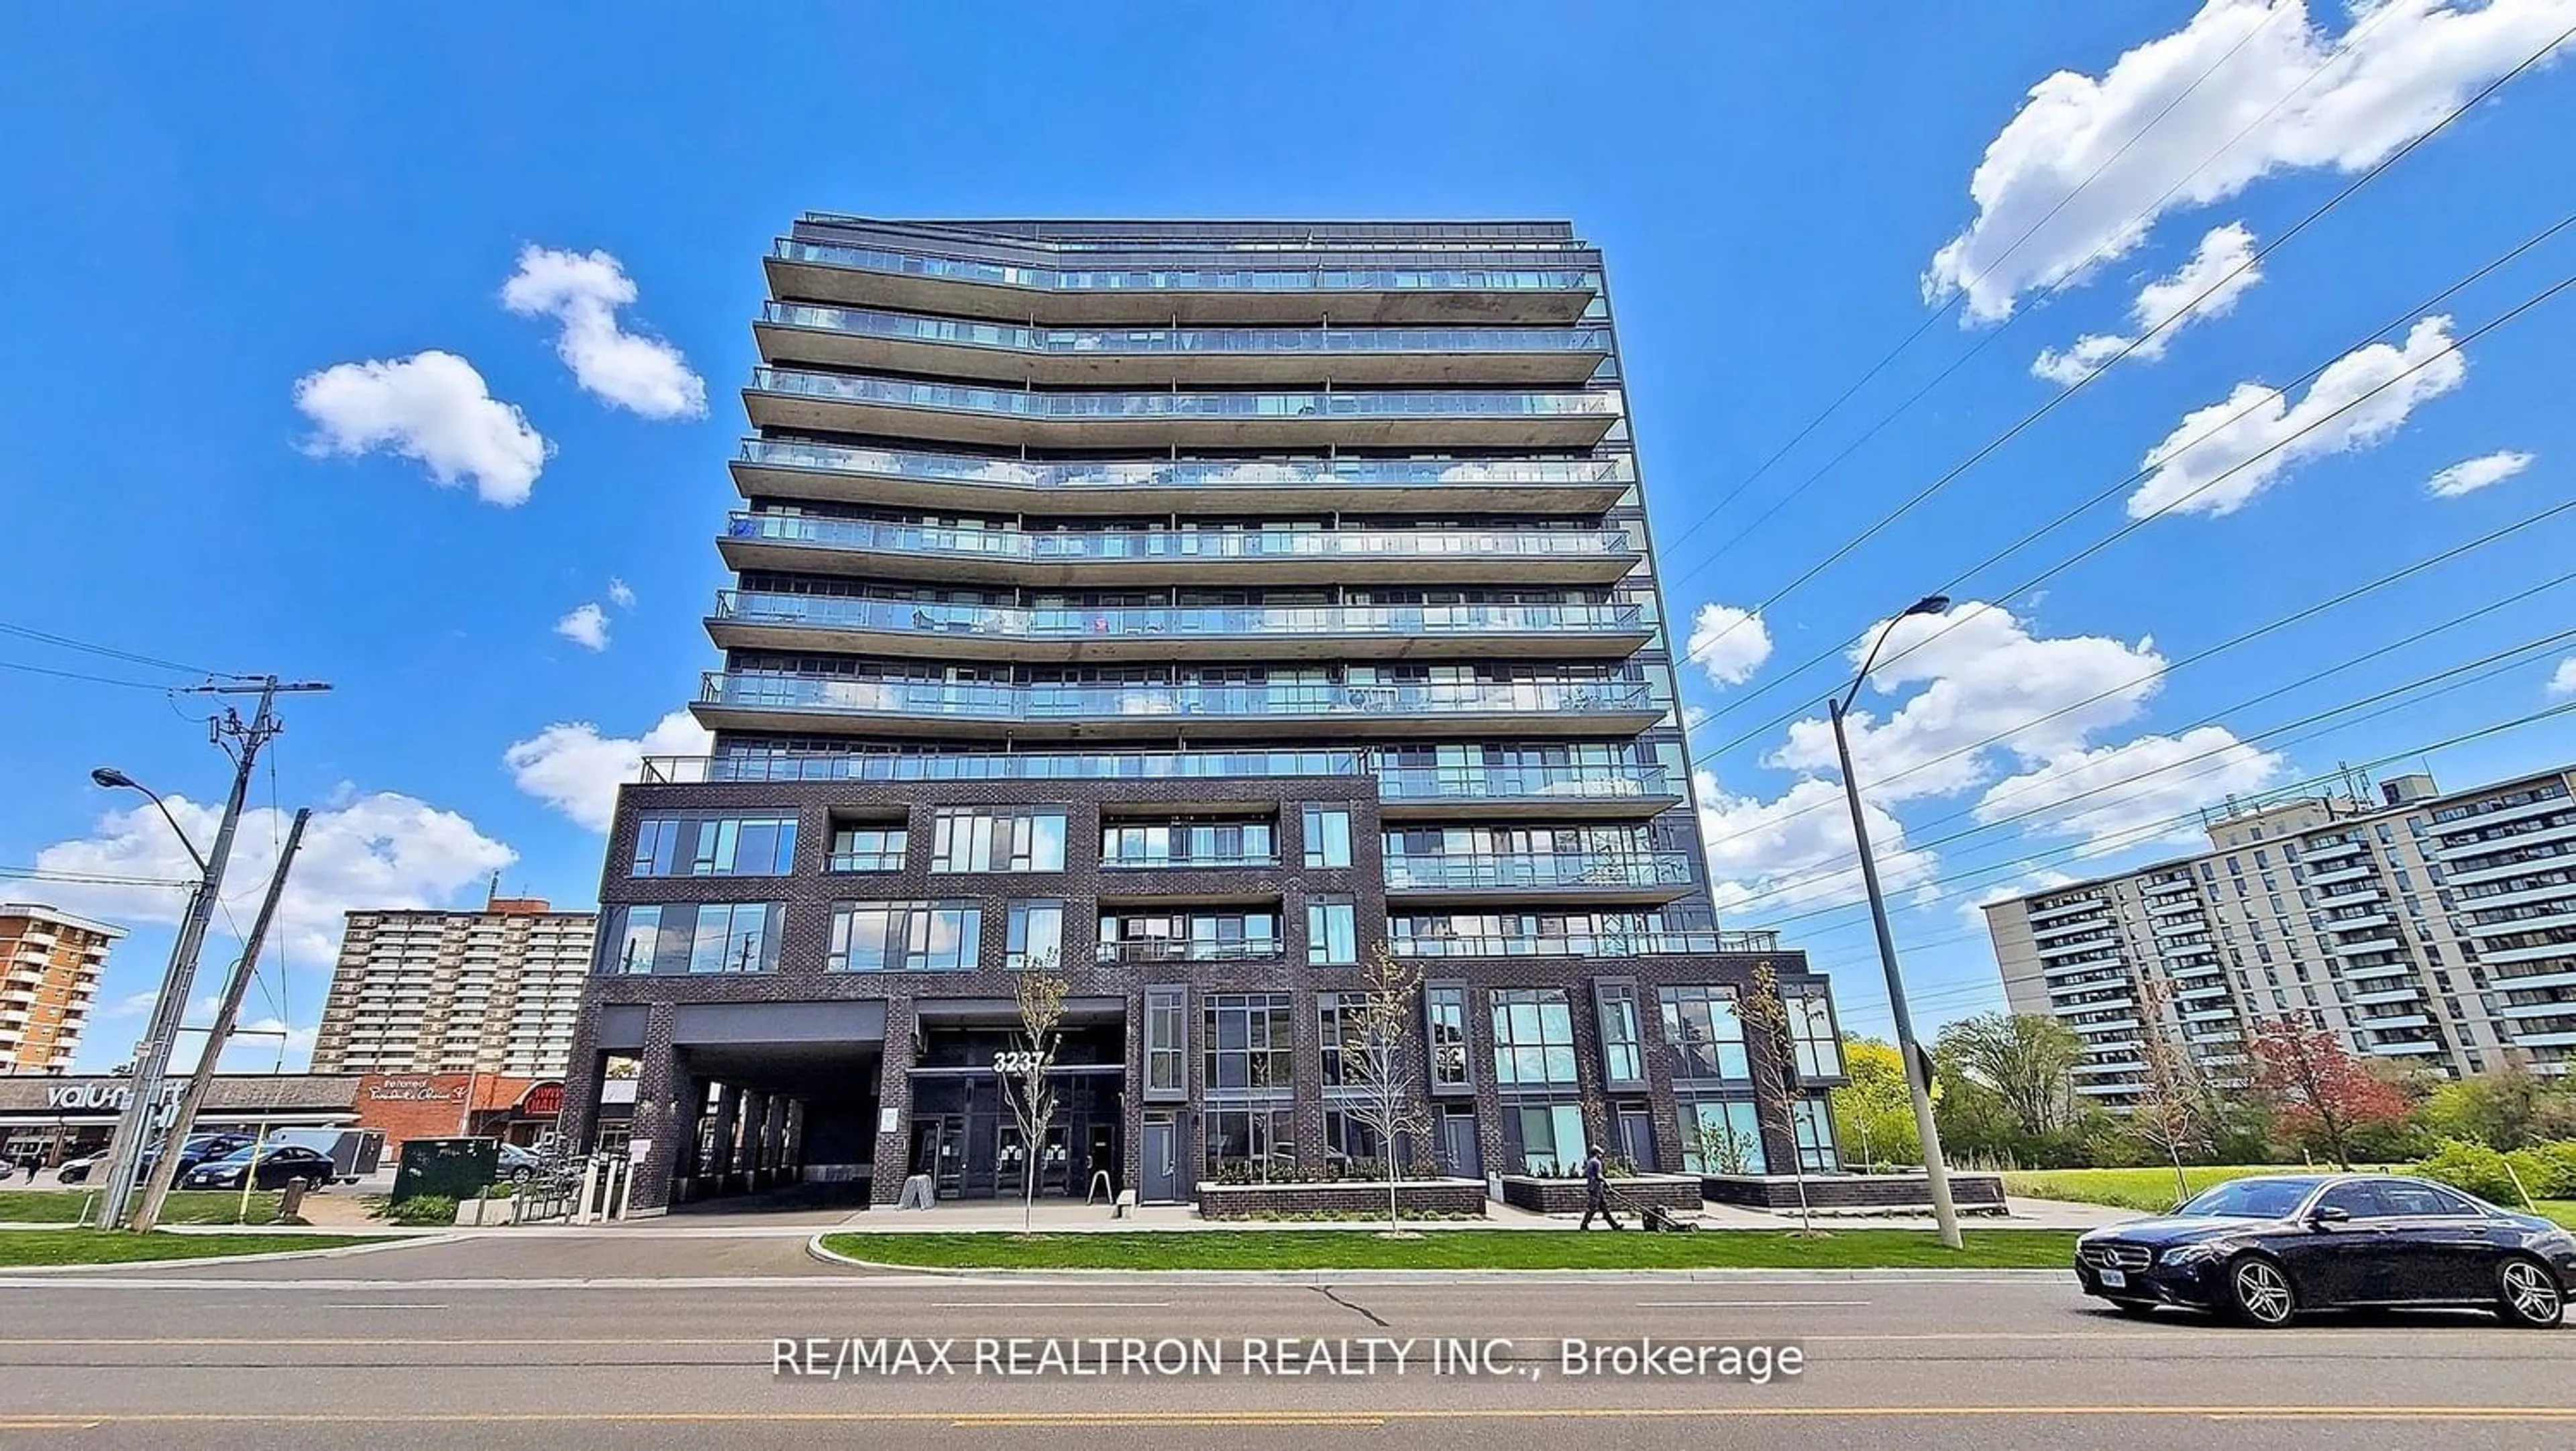 A pic from exterior of the house or condo for 3237 Bayview Ave #803, Toronto Ontario M2K 0G1